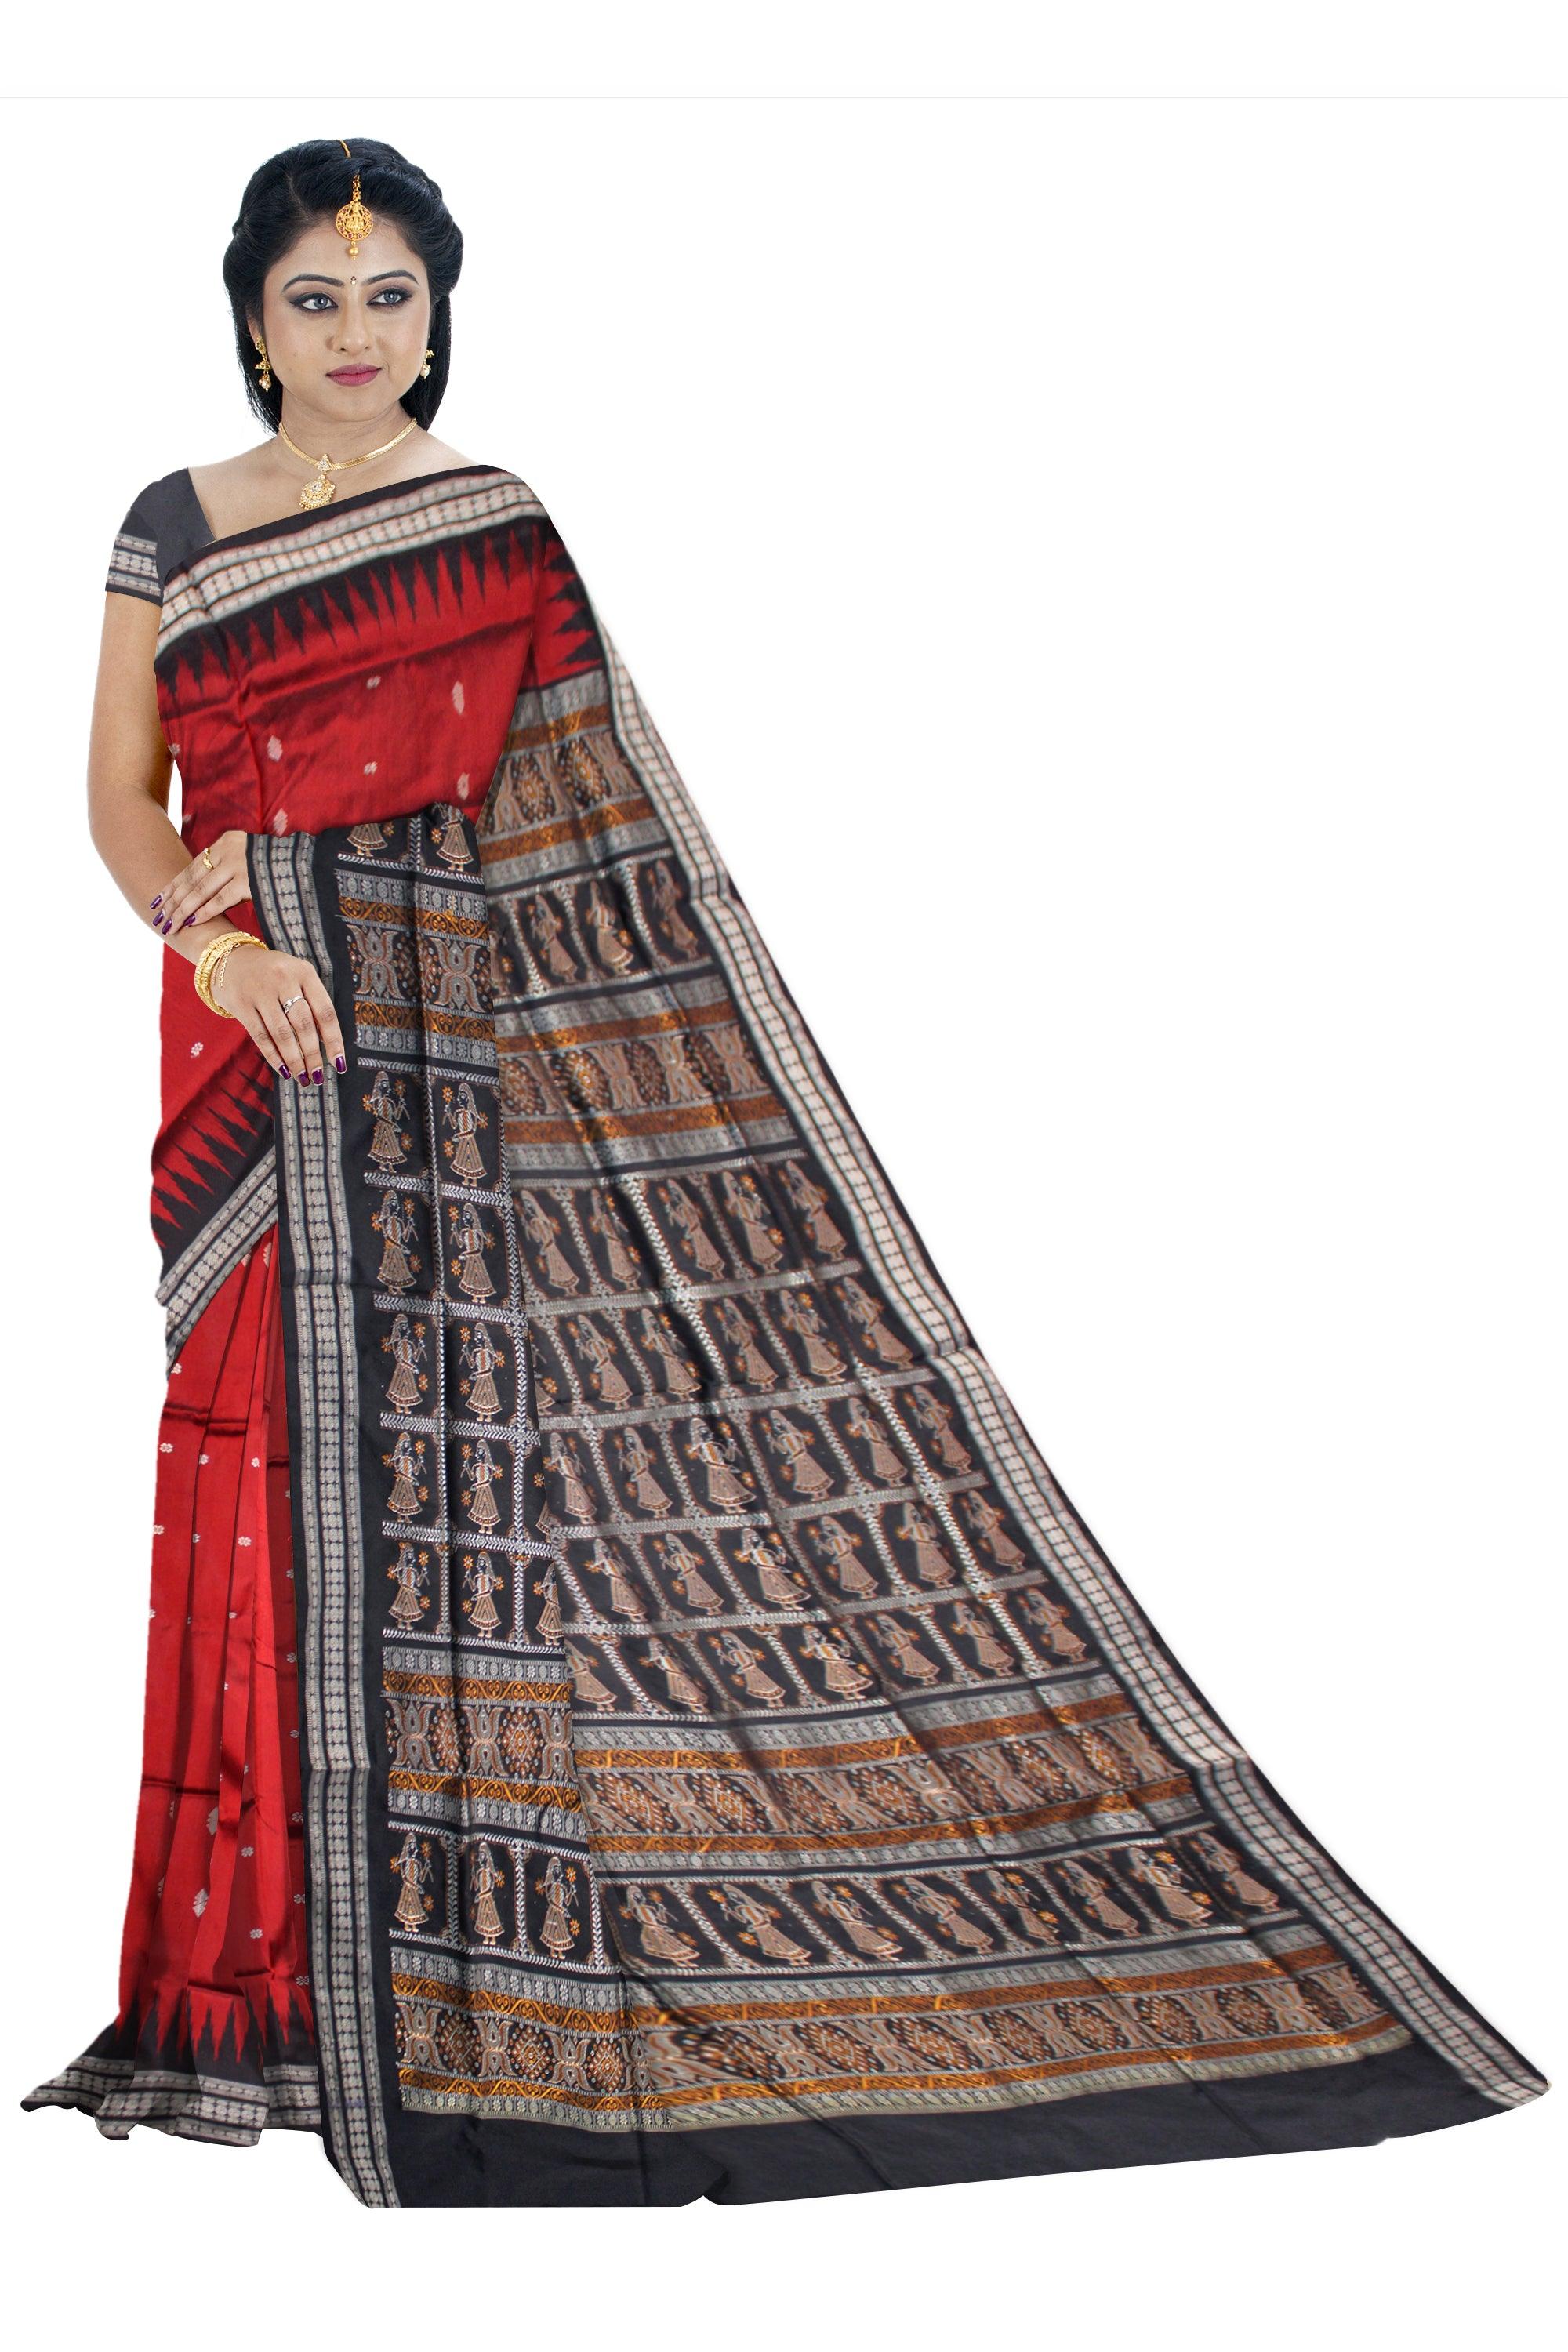 A NEW DESIGN OF SONEPUR PATLI SAREE IN MAROON AND BLACK COLOR, WITH BLOUSE PIECE. - Koshali Arts & Crafts Enterprise